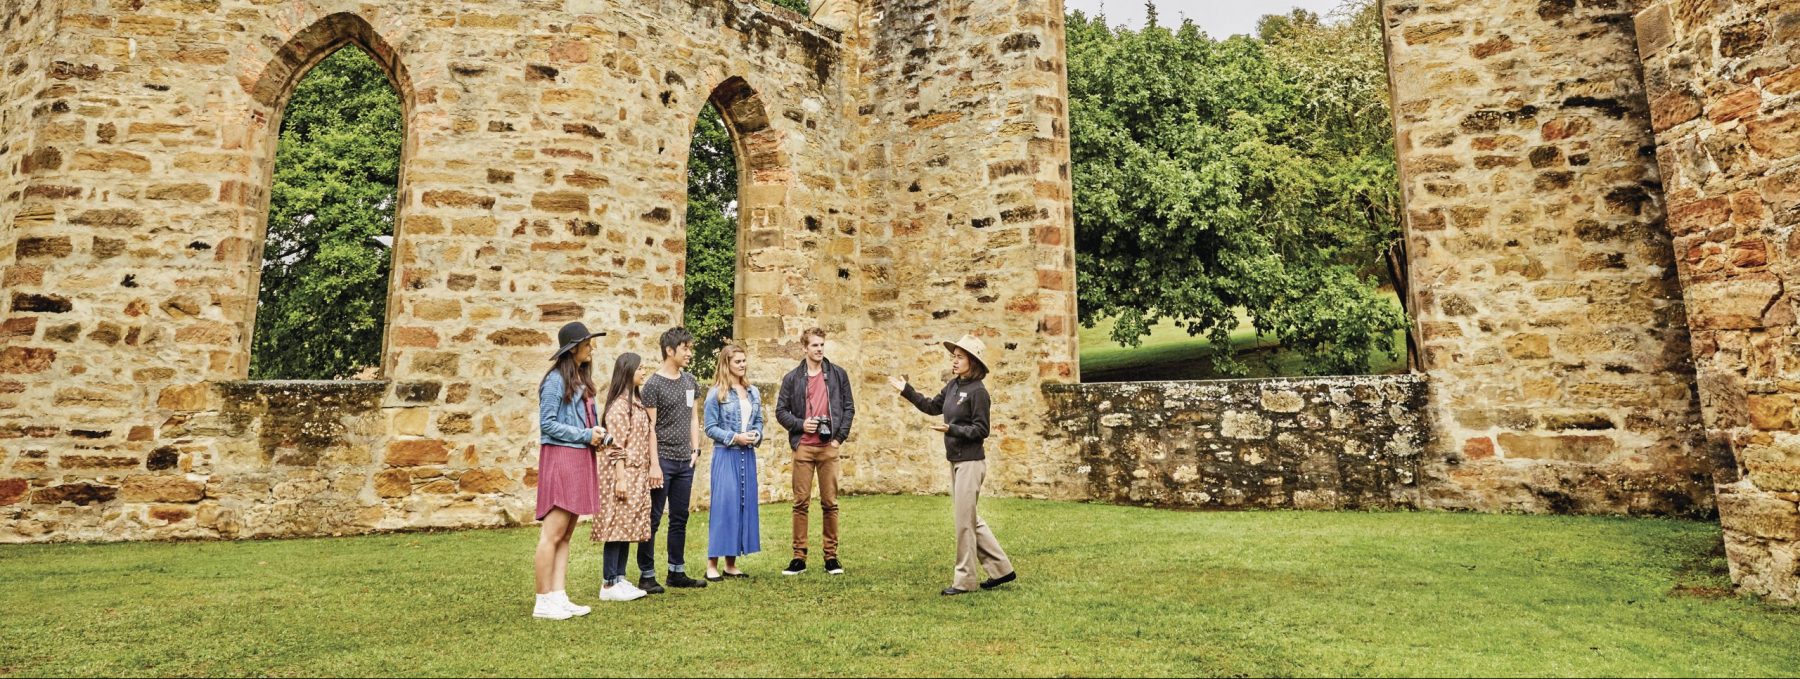 a port arthur guide in uniform speaking to a group of visitors in the sandstone ruins of the Convict Church